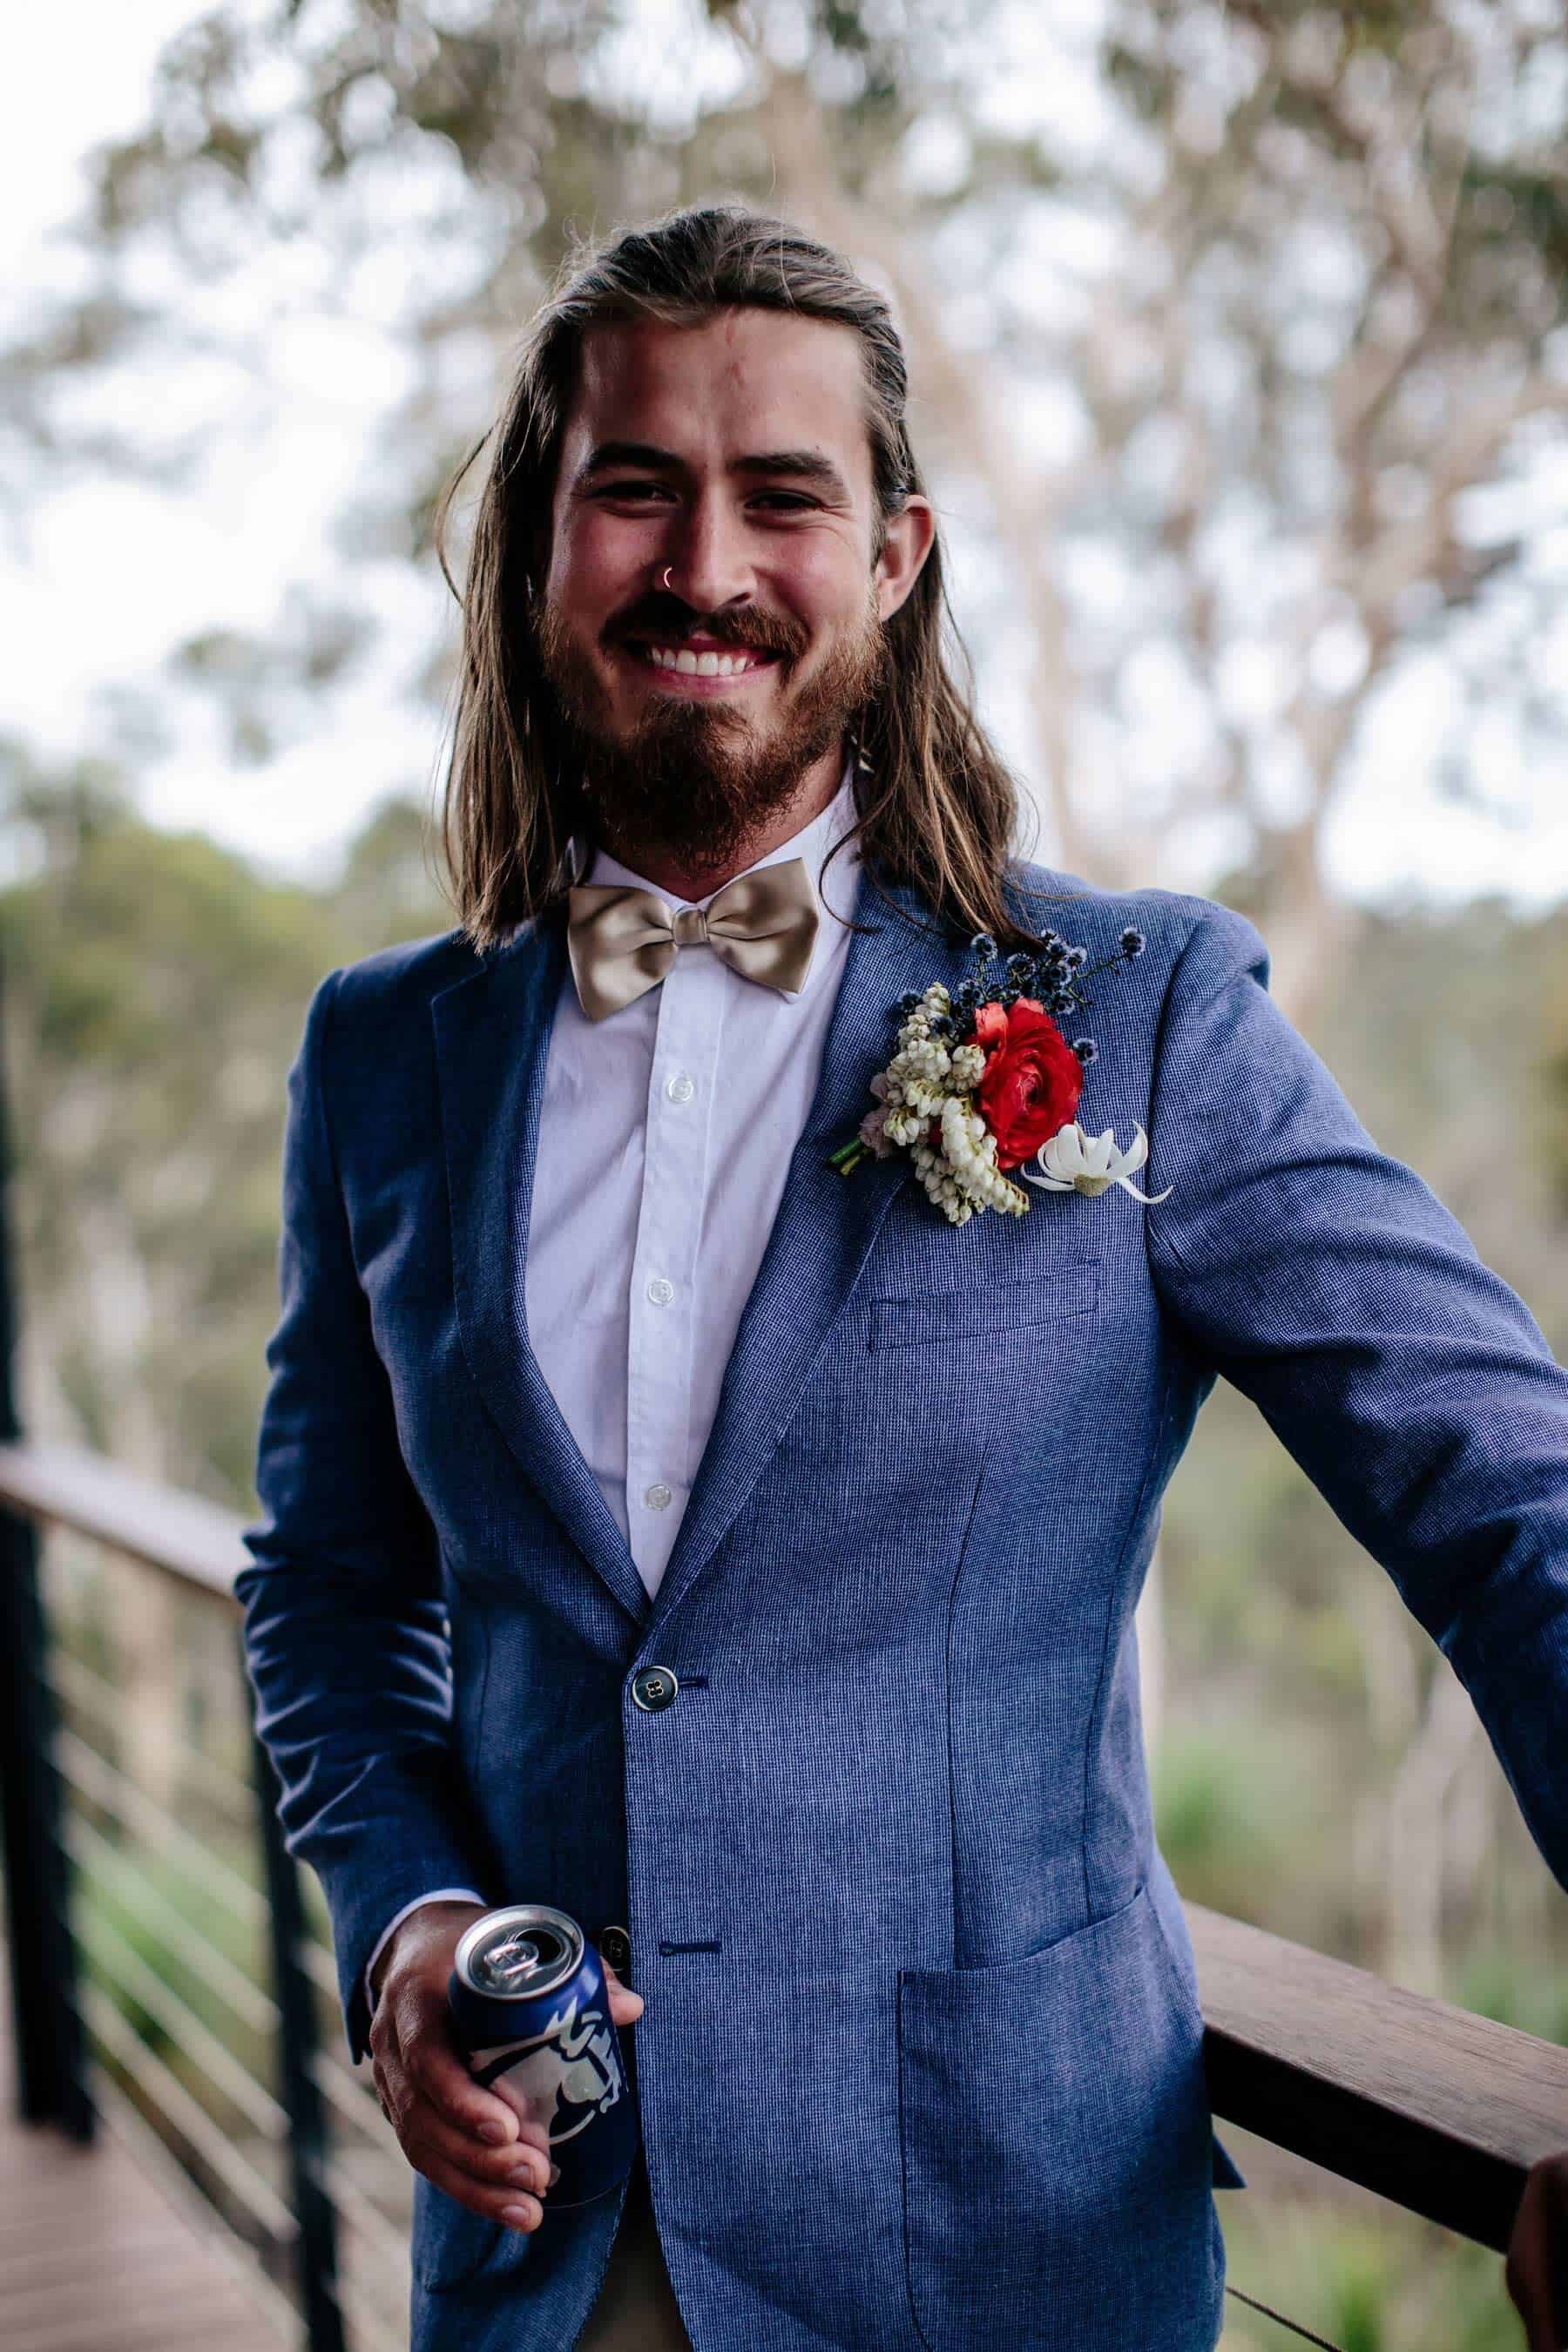 Navy blazer with gold bowtie and red rose boutonnière